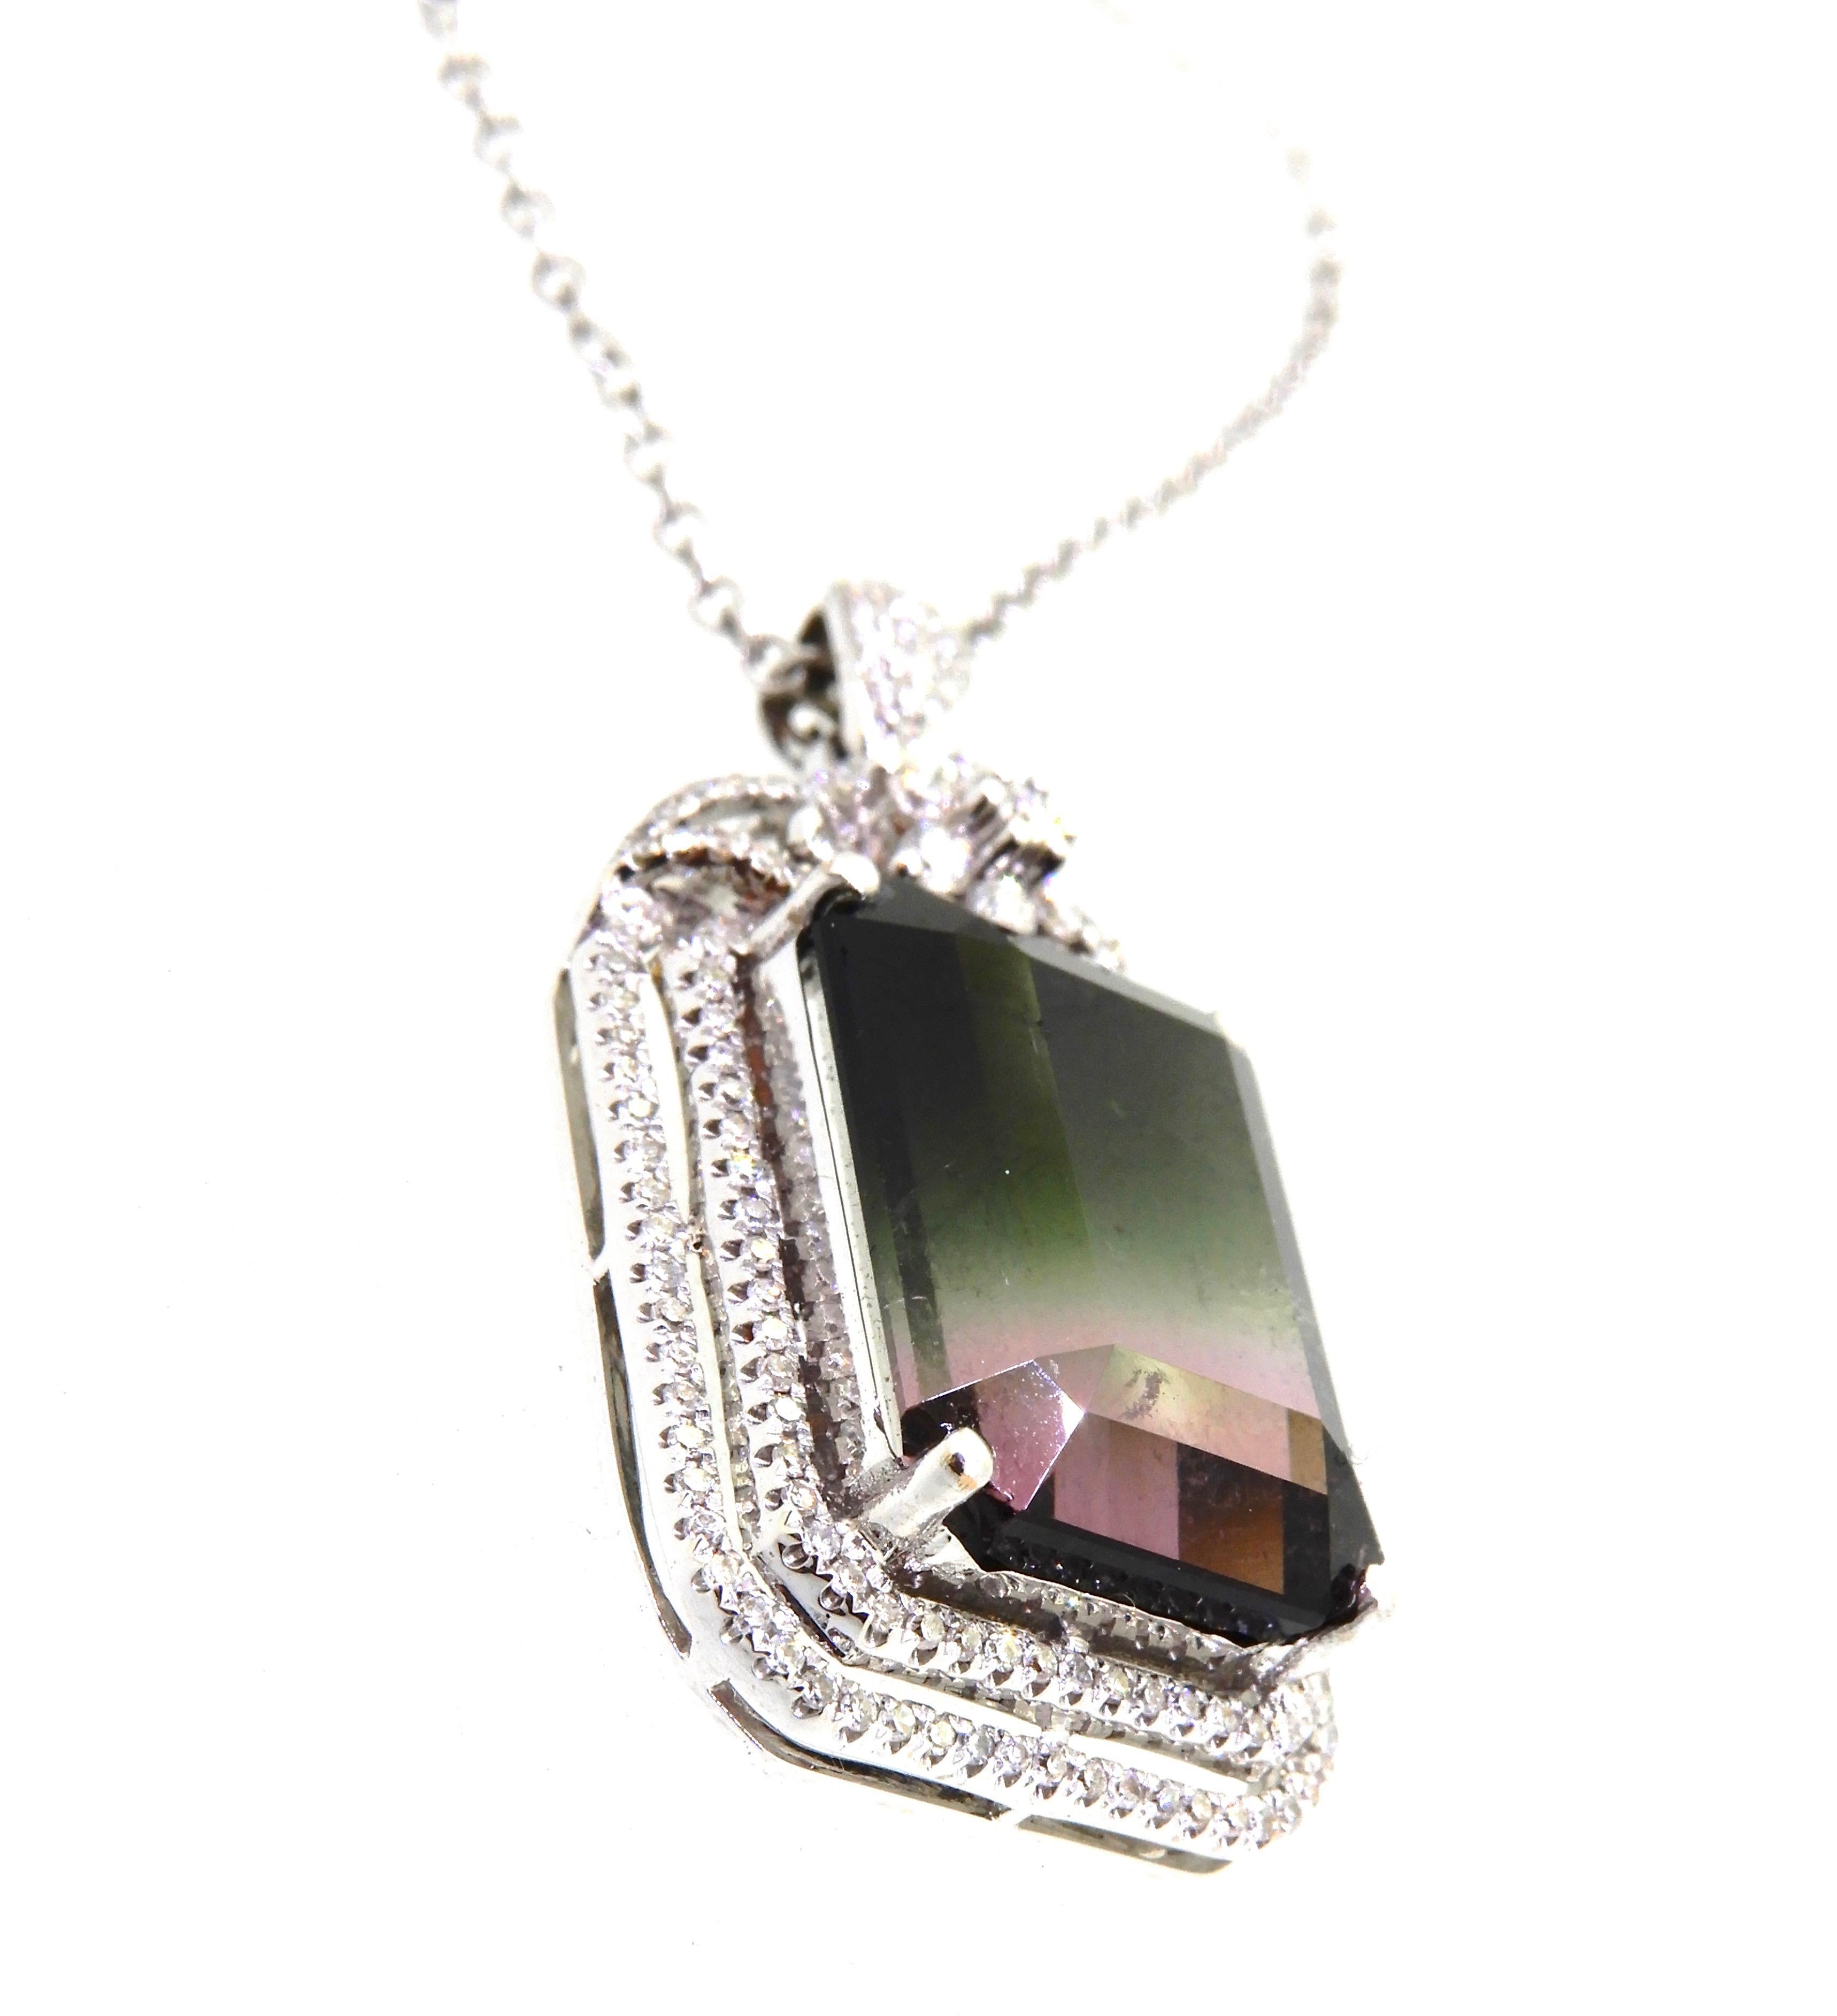 This substantial and show-stopping 10.75 Carat Emerald Cut Watermelon Tourmaline and Diamond Pendant is a must have in your jewellery chest. Feminine, colourful and eye catching. 

The Pendant is a central 4-claw set emerald cut 